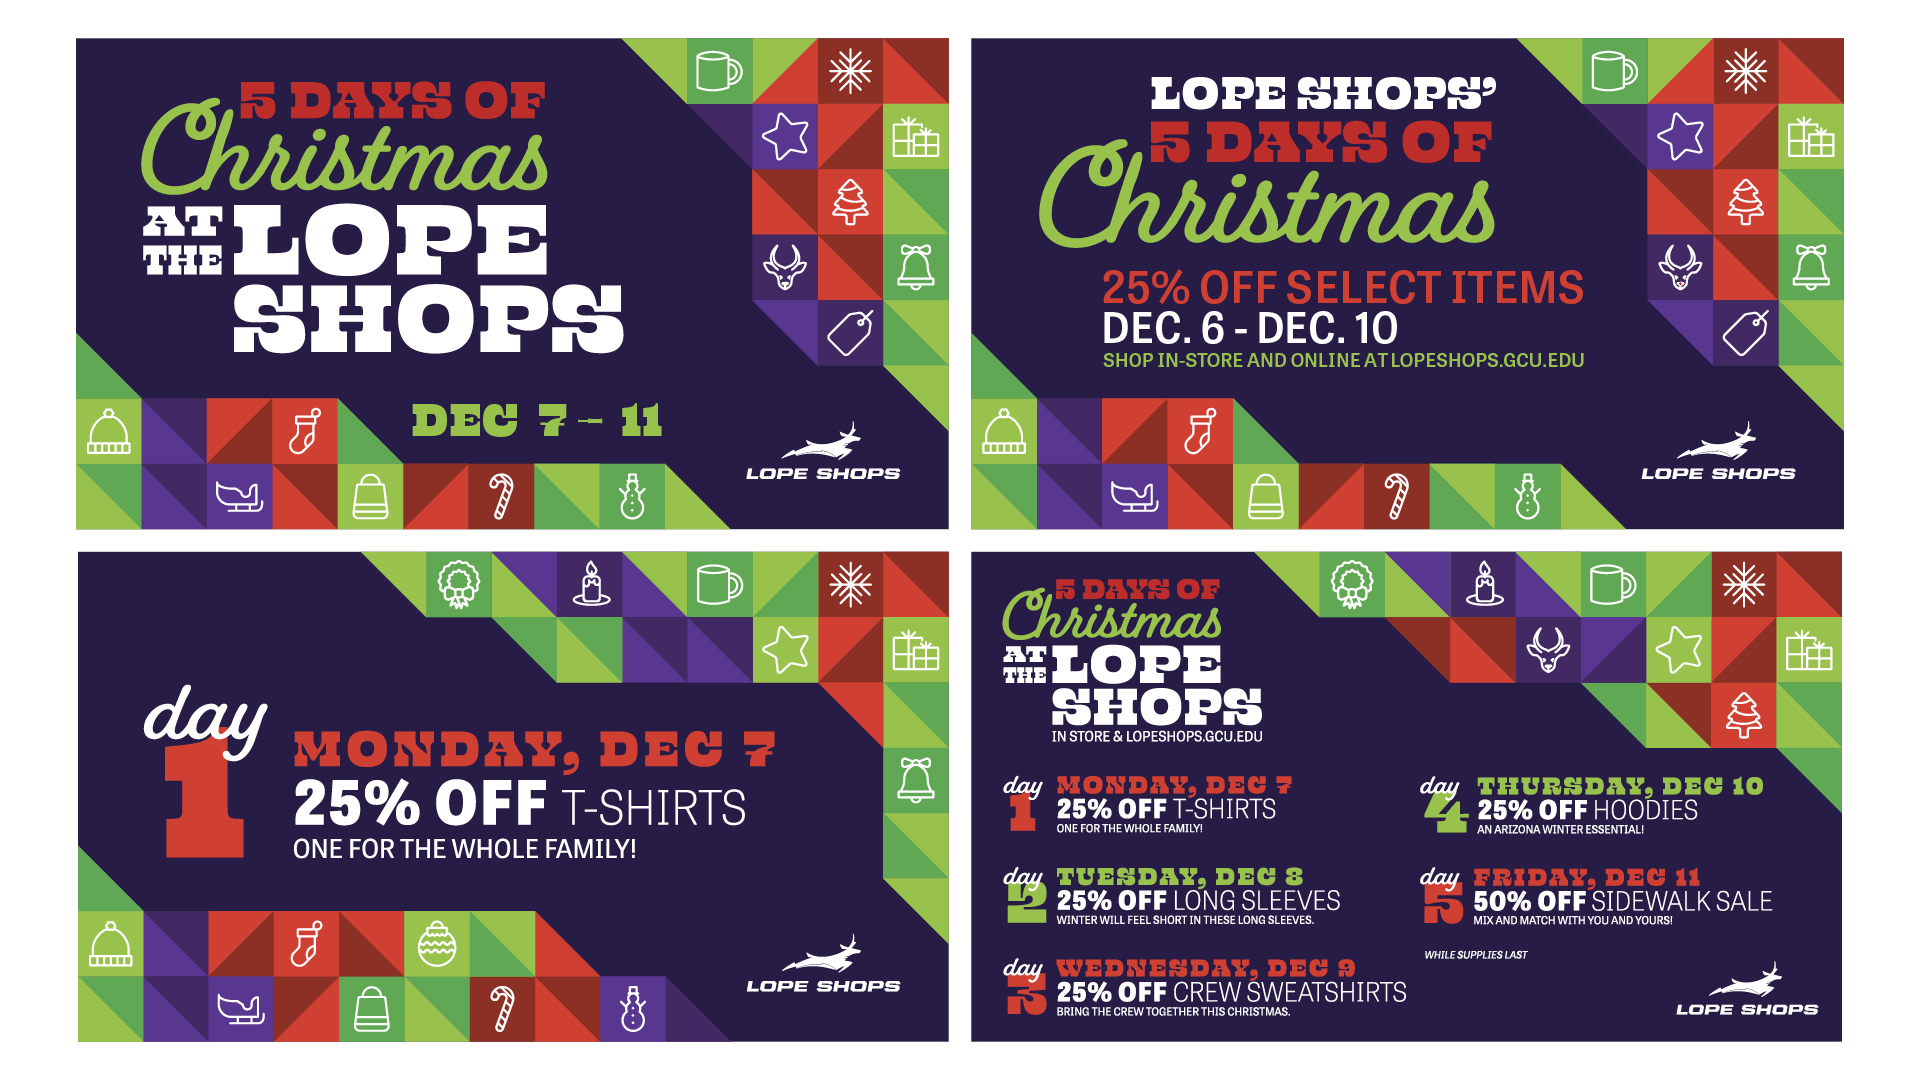 featured image two:Five Days of Christmas at the Lopes Shops